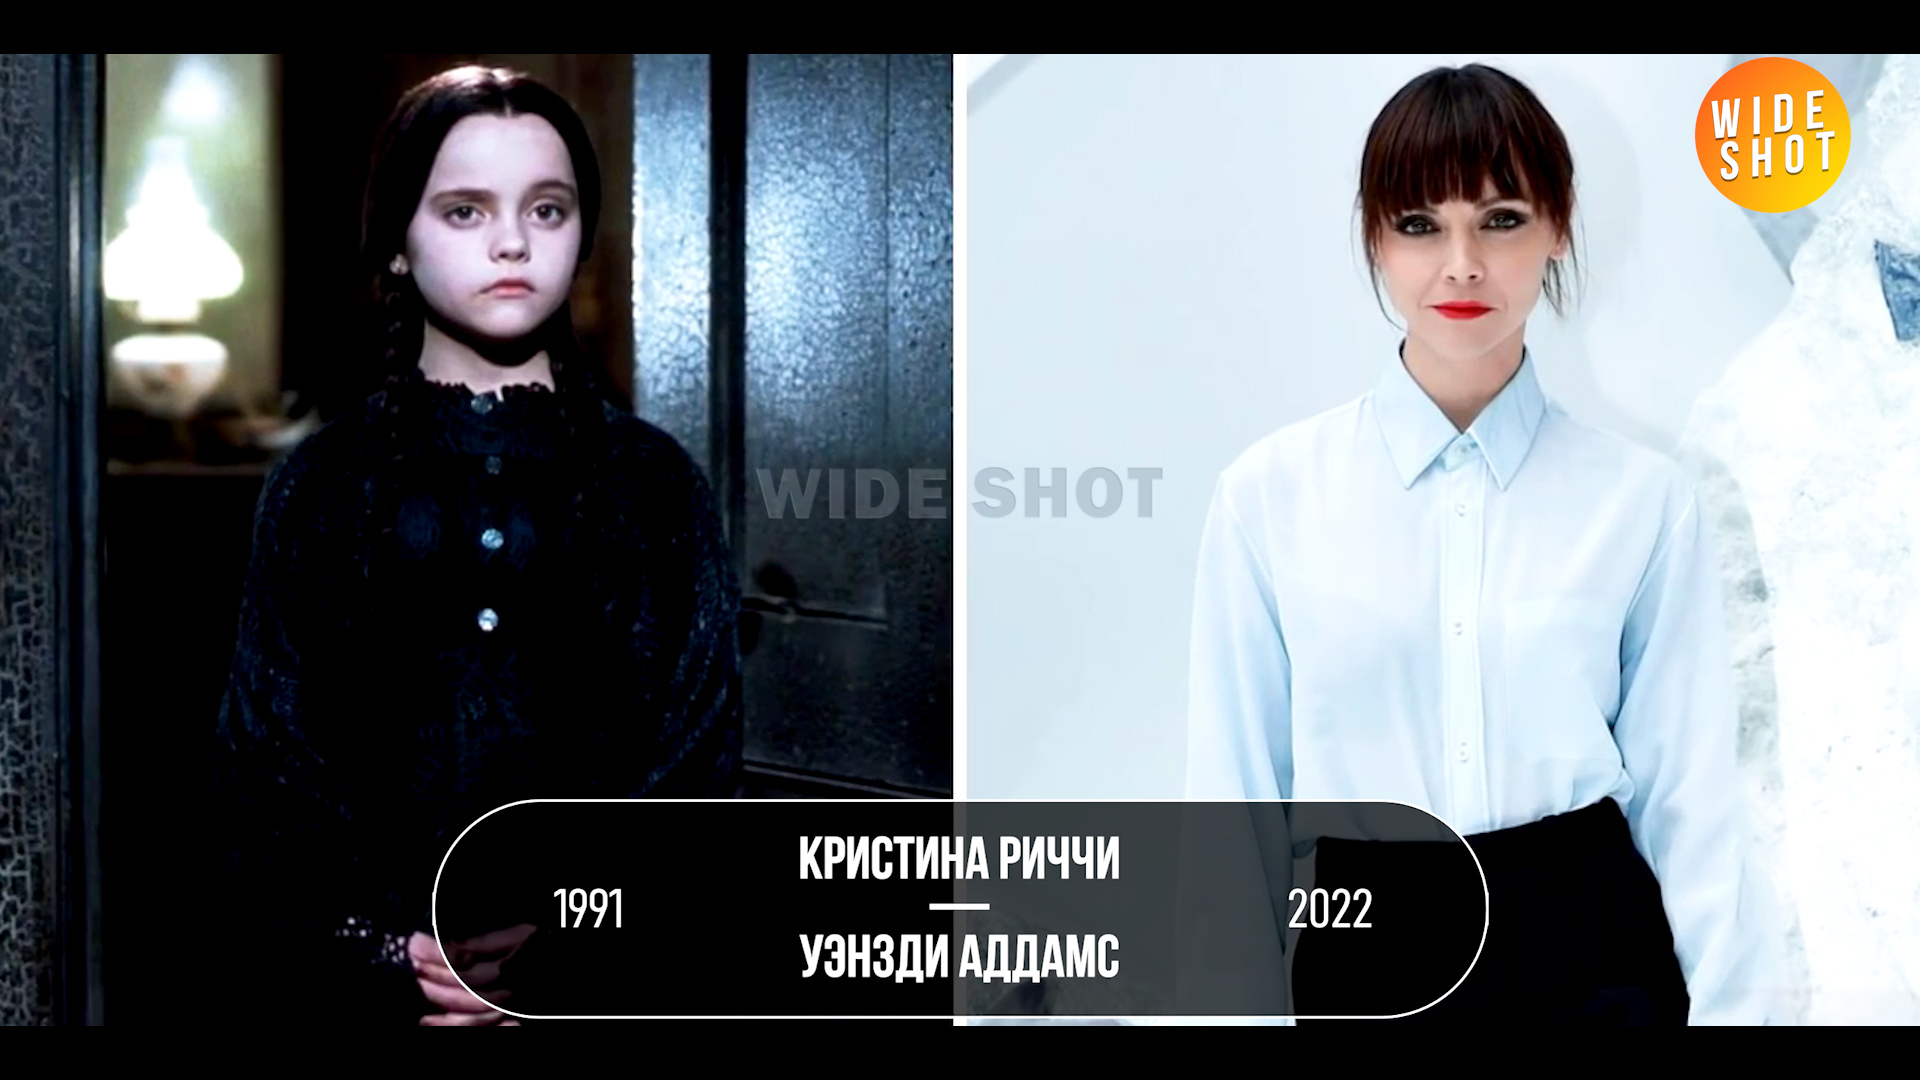 THE ADDAMS FAMILY (1991): THE ACTORS THEN AND NOW (31 YEARS LATER) - Movies, Actors and actresses, Video review, Hollywood, Celebrities, It Was-It Was, The Addams Family, I advise you to look, Films of the 90s, Christina Ricci, Video, Youtube, Longpost